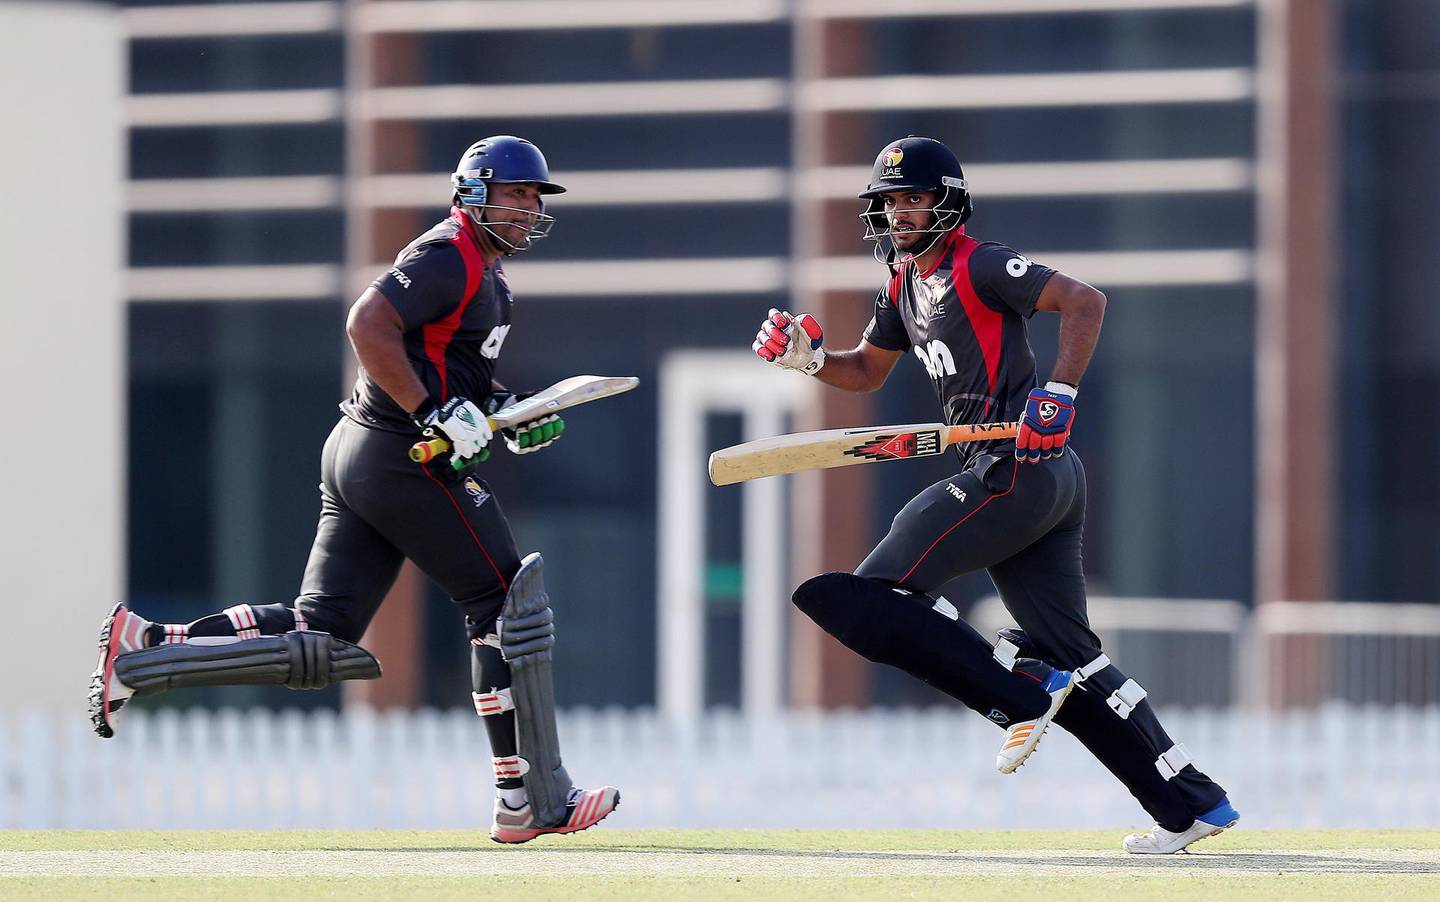 DUBAI , UNITED ARAB EMIRATES , NOV 16   – 2017 :-  Left to Right - Ashfaq Ahmed and Chirag Suri of UAE team running between the wickets during the one day international cricket match against Zimbabwe A team at the ICC Academy in Dubai Sports City in Dubai. (Pawan Singh / The National) Story by Paul Radley